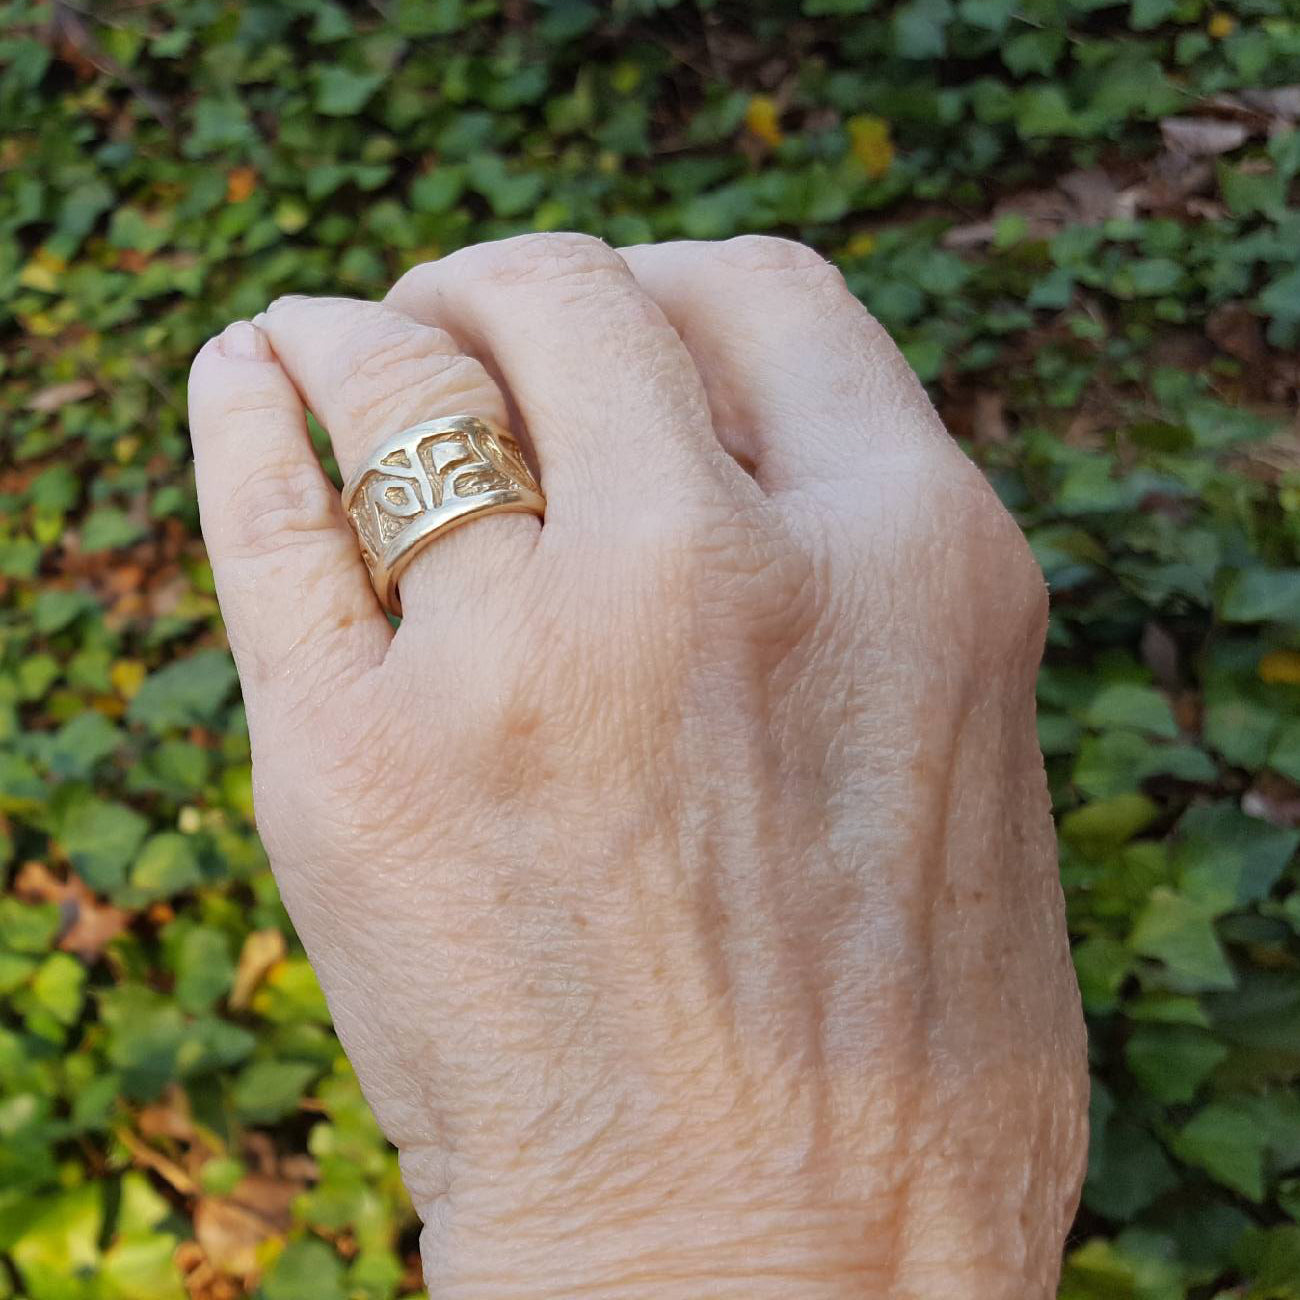 Inspiration: My father's jewelry making